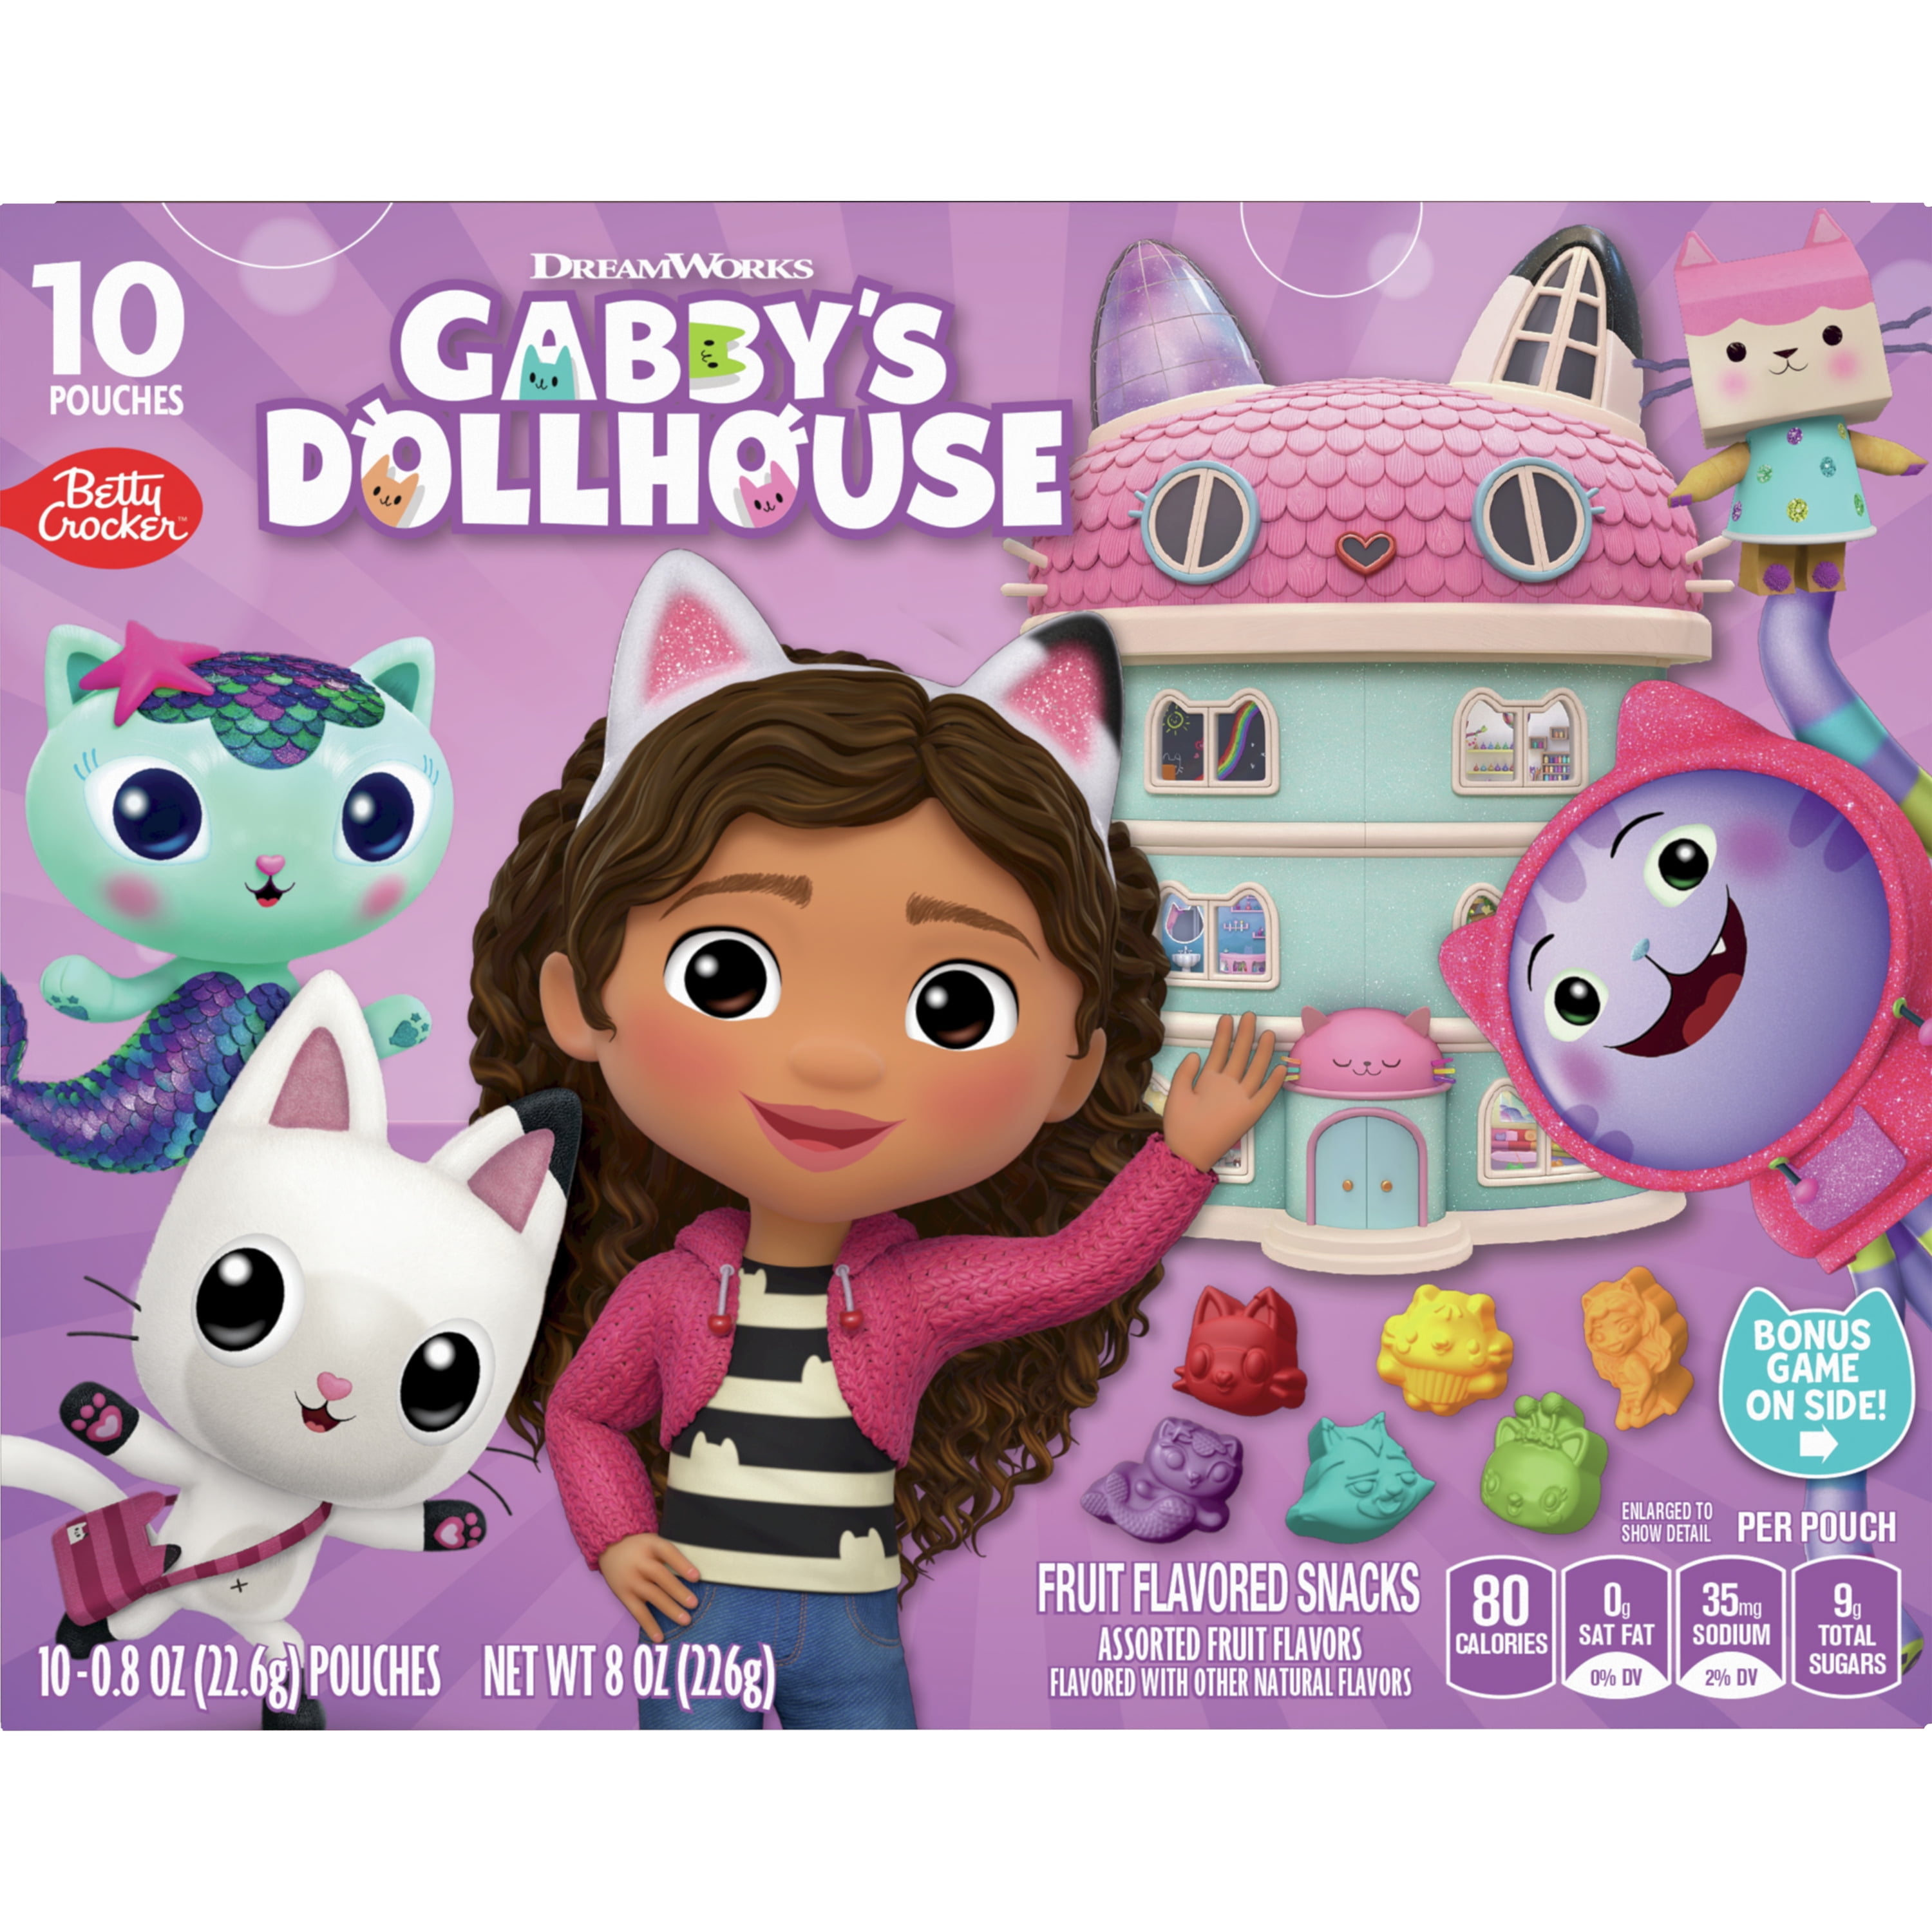 Spin Master Gabby's Dollhouse Gabby's Purrfect Dollhouse Playset, 1 ct -  Fry's Food Stores